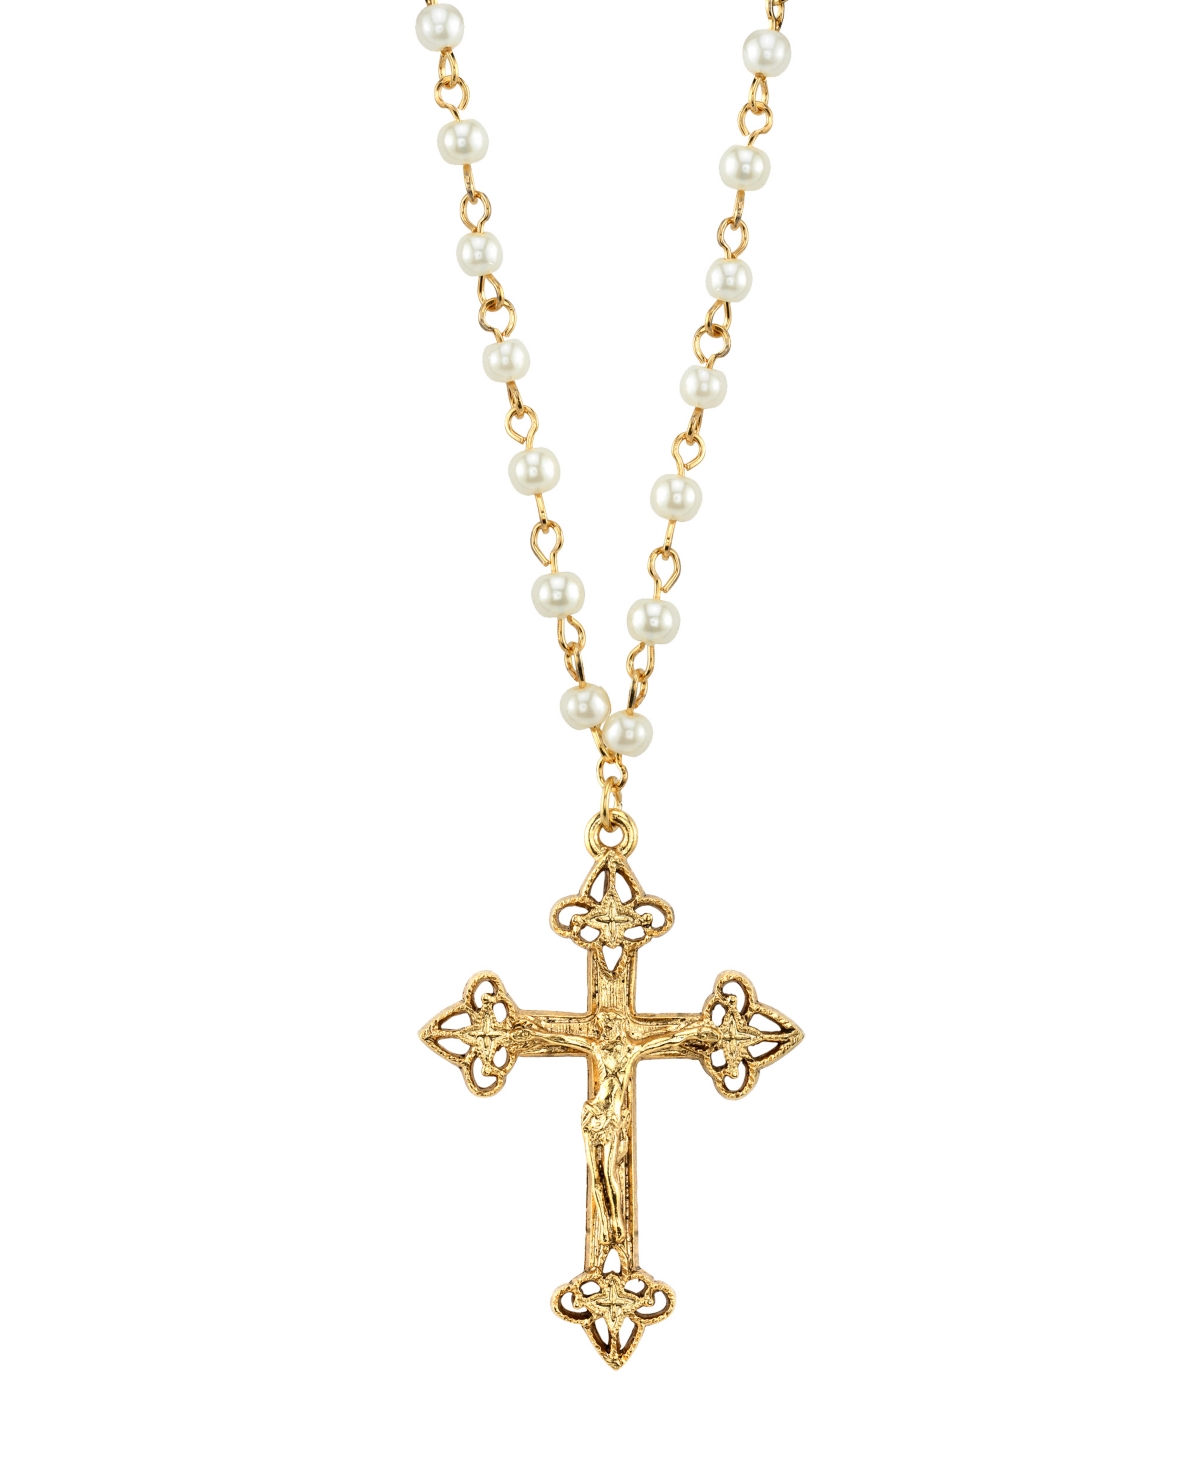 2028 14k Gold Tone Simulated Pearl Chain Crucifix Cross Pendant Necklace 16" Adjustable In White